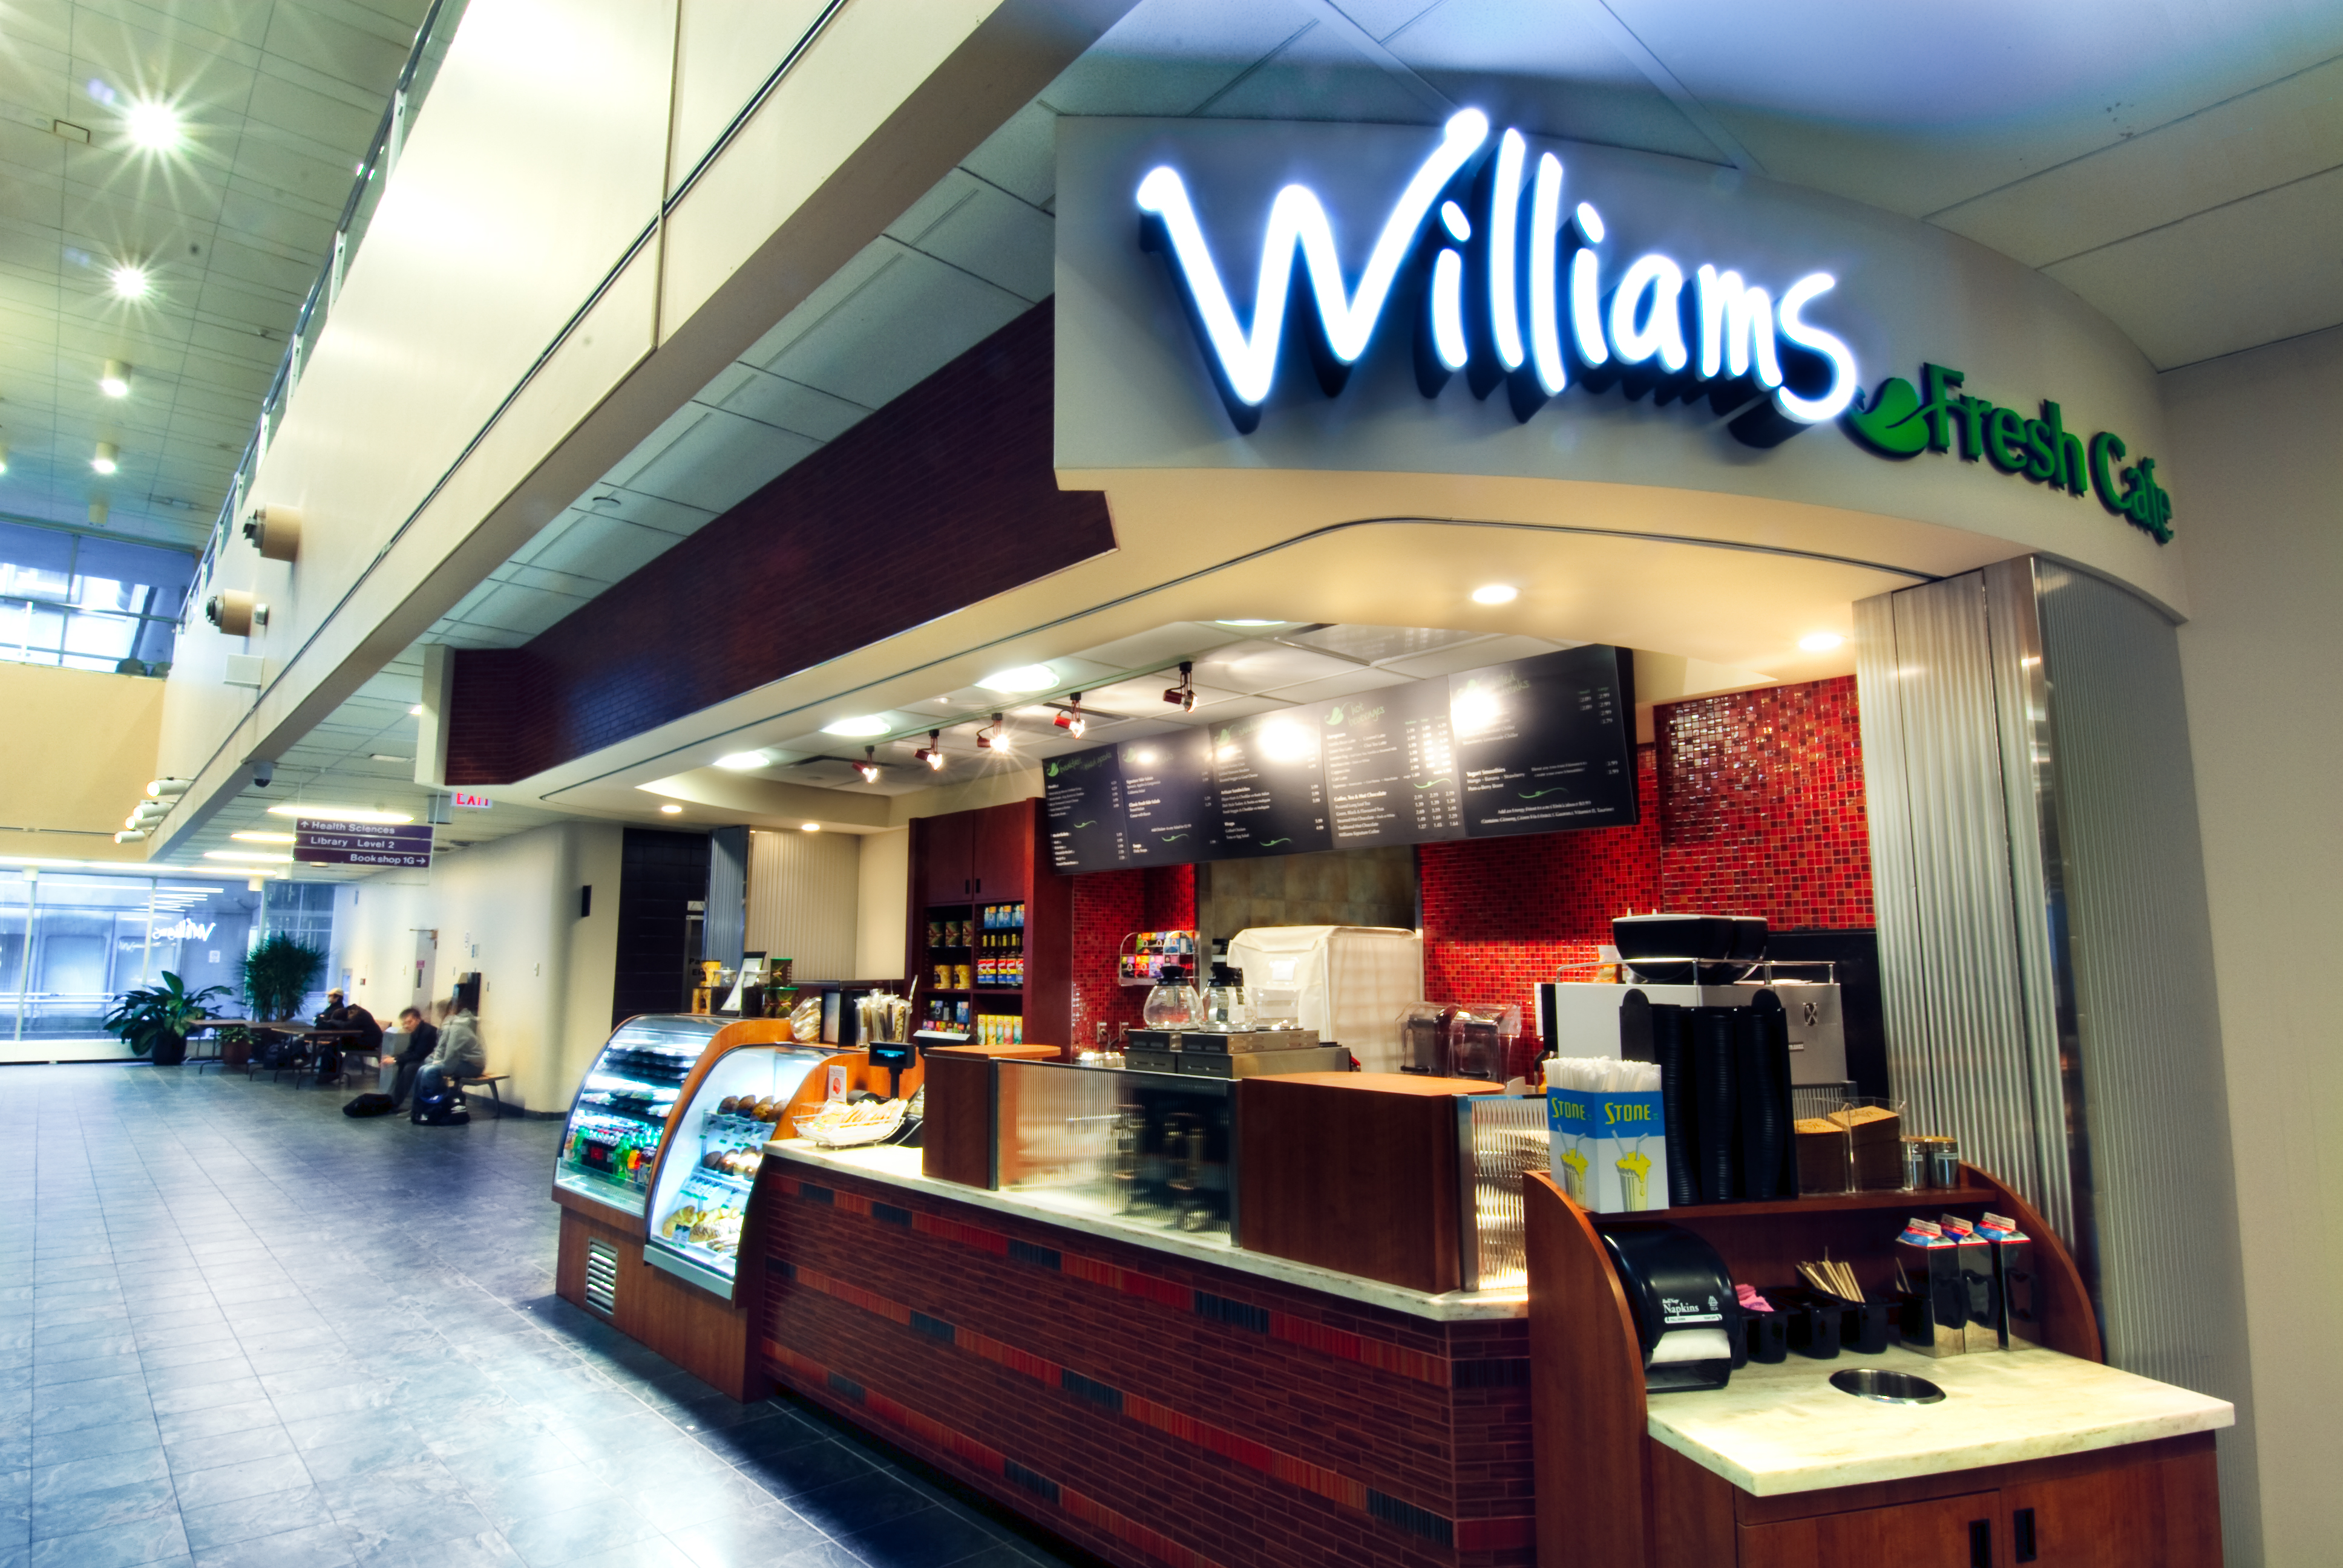 Side view of a Williams Cafe